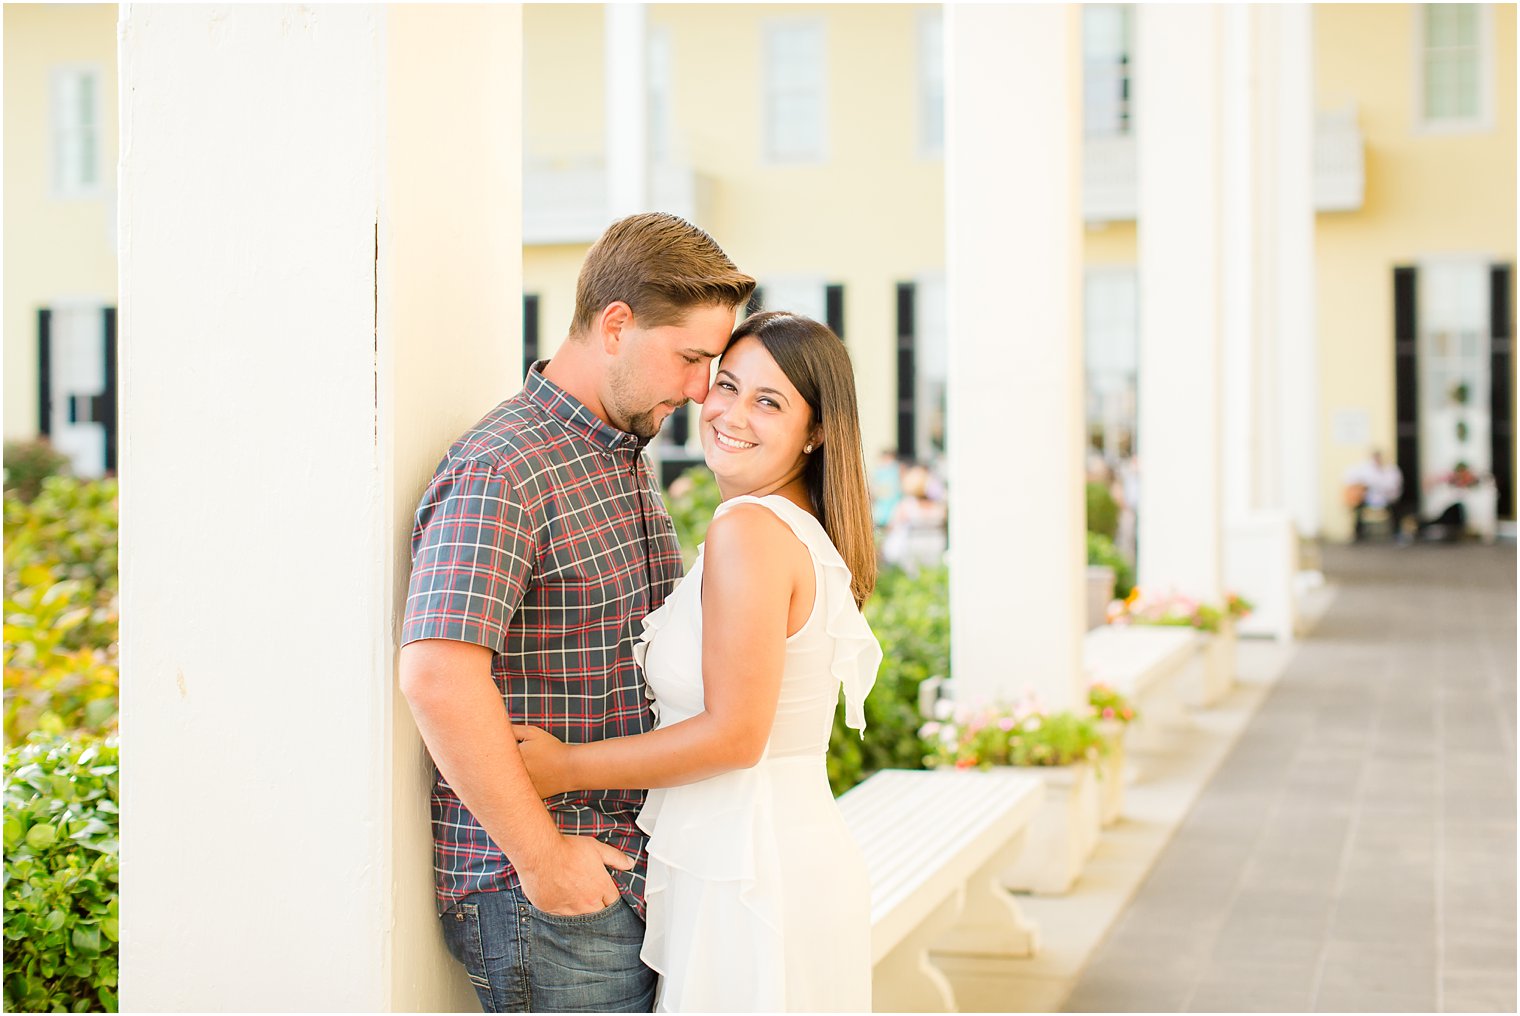 Romantic engagement photos in Congress Hall, Cape May NJ